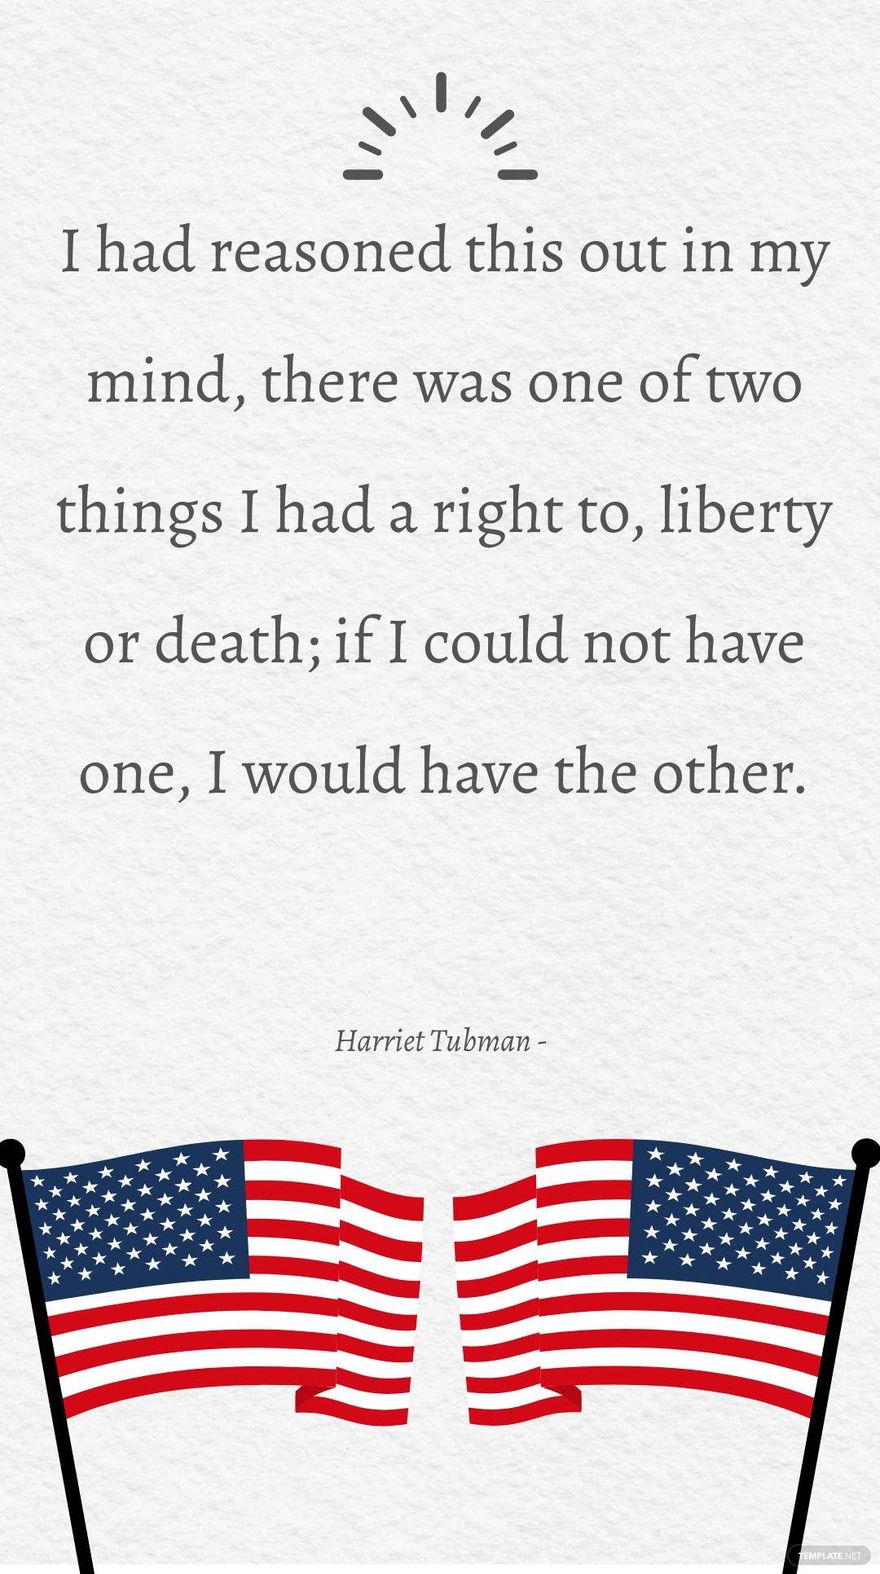 Harriet Tubman - I had reasoned this out in my mind, there was one of two things I had a right to, liberty or death; if I could not have one, I would have the other.